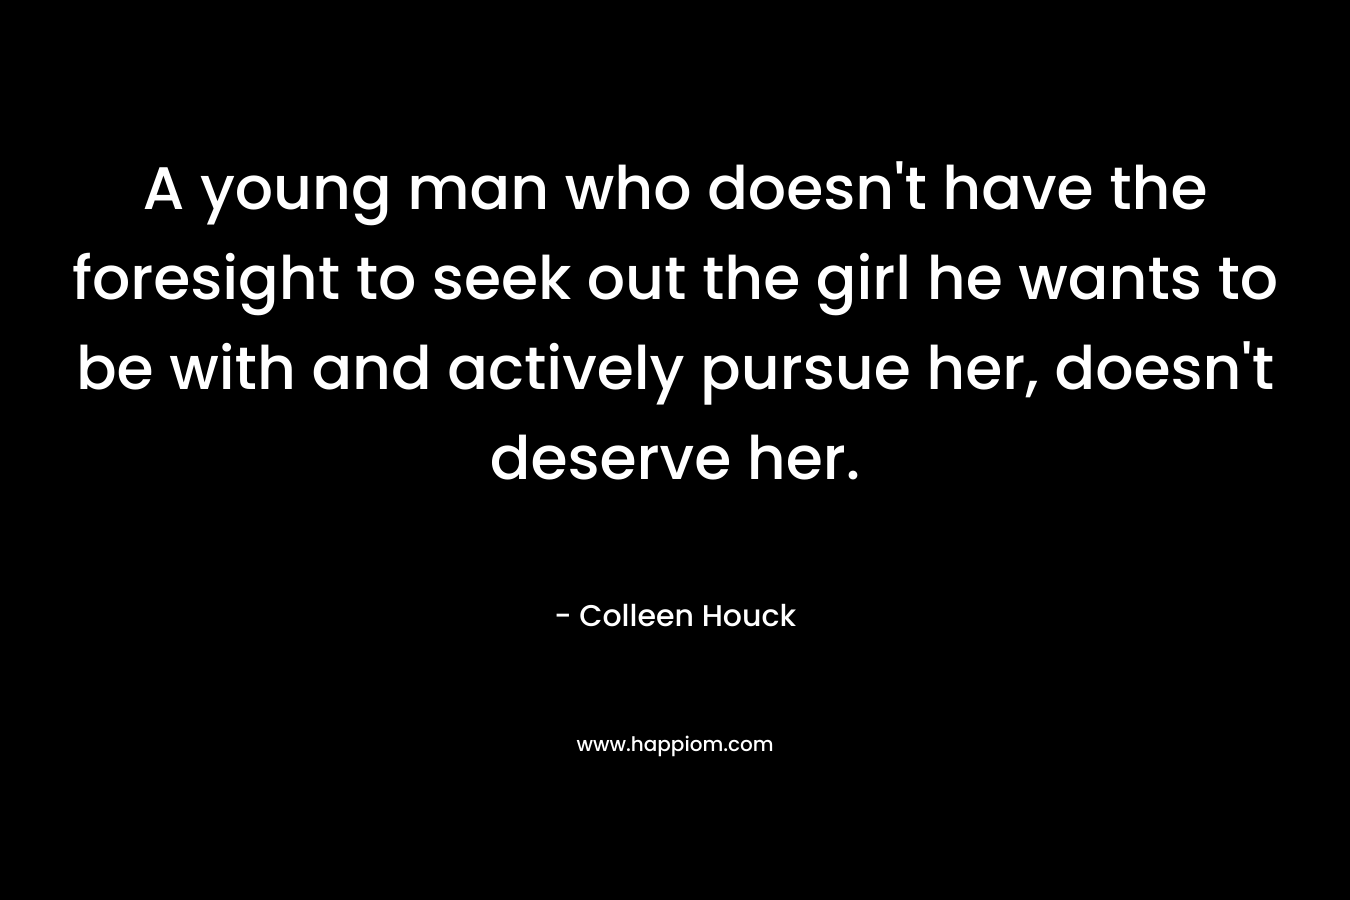 A young man who doesn't have the foresight to seek out the girl he wants to be with and actively pursue her, doesn't deserve her.